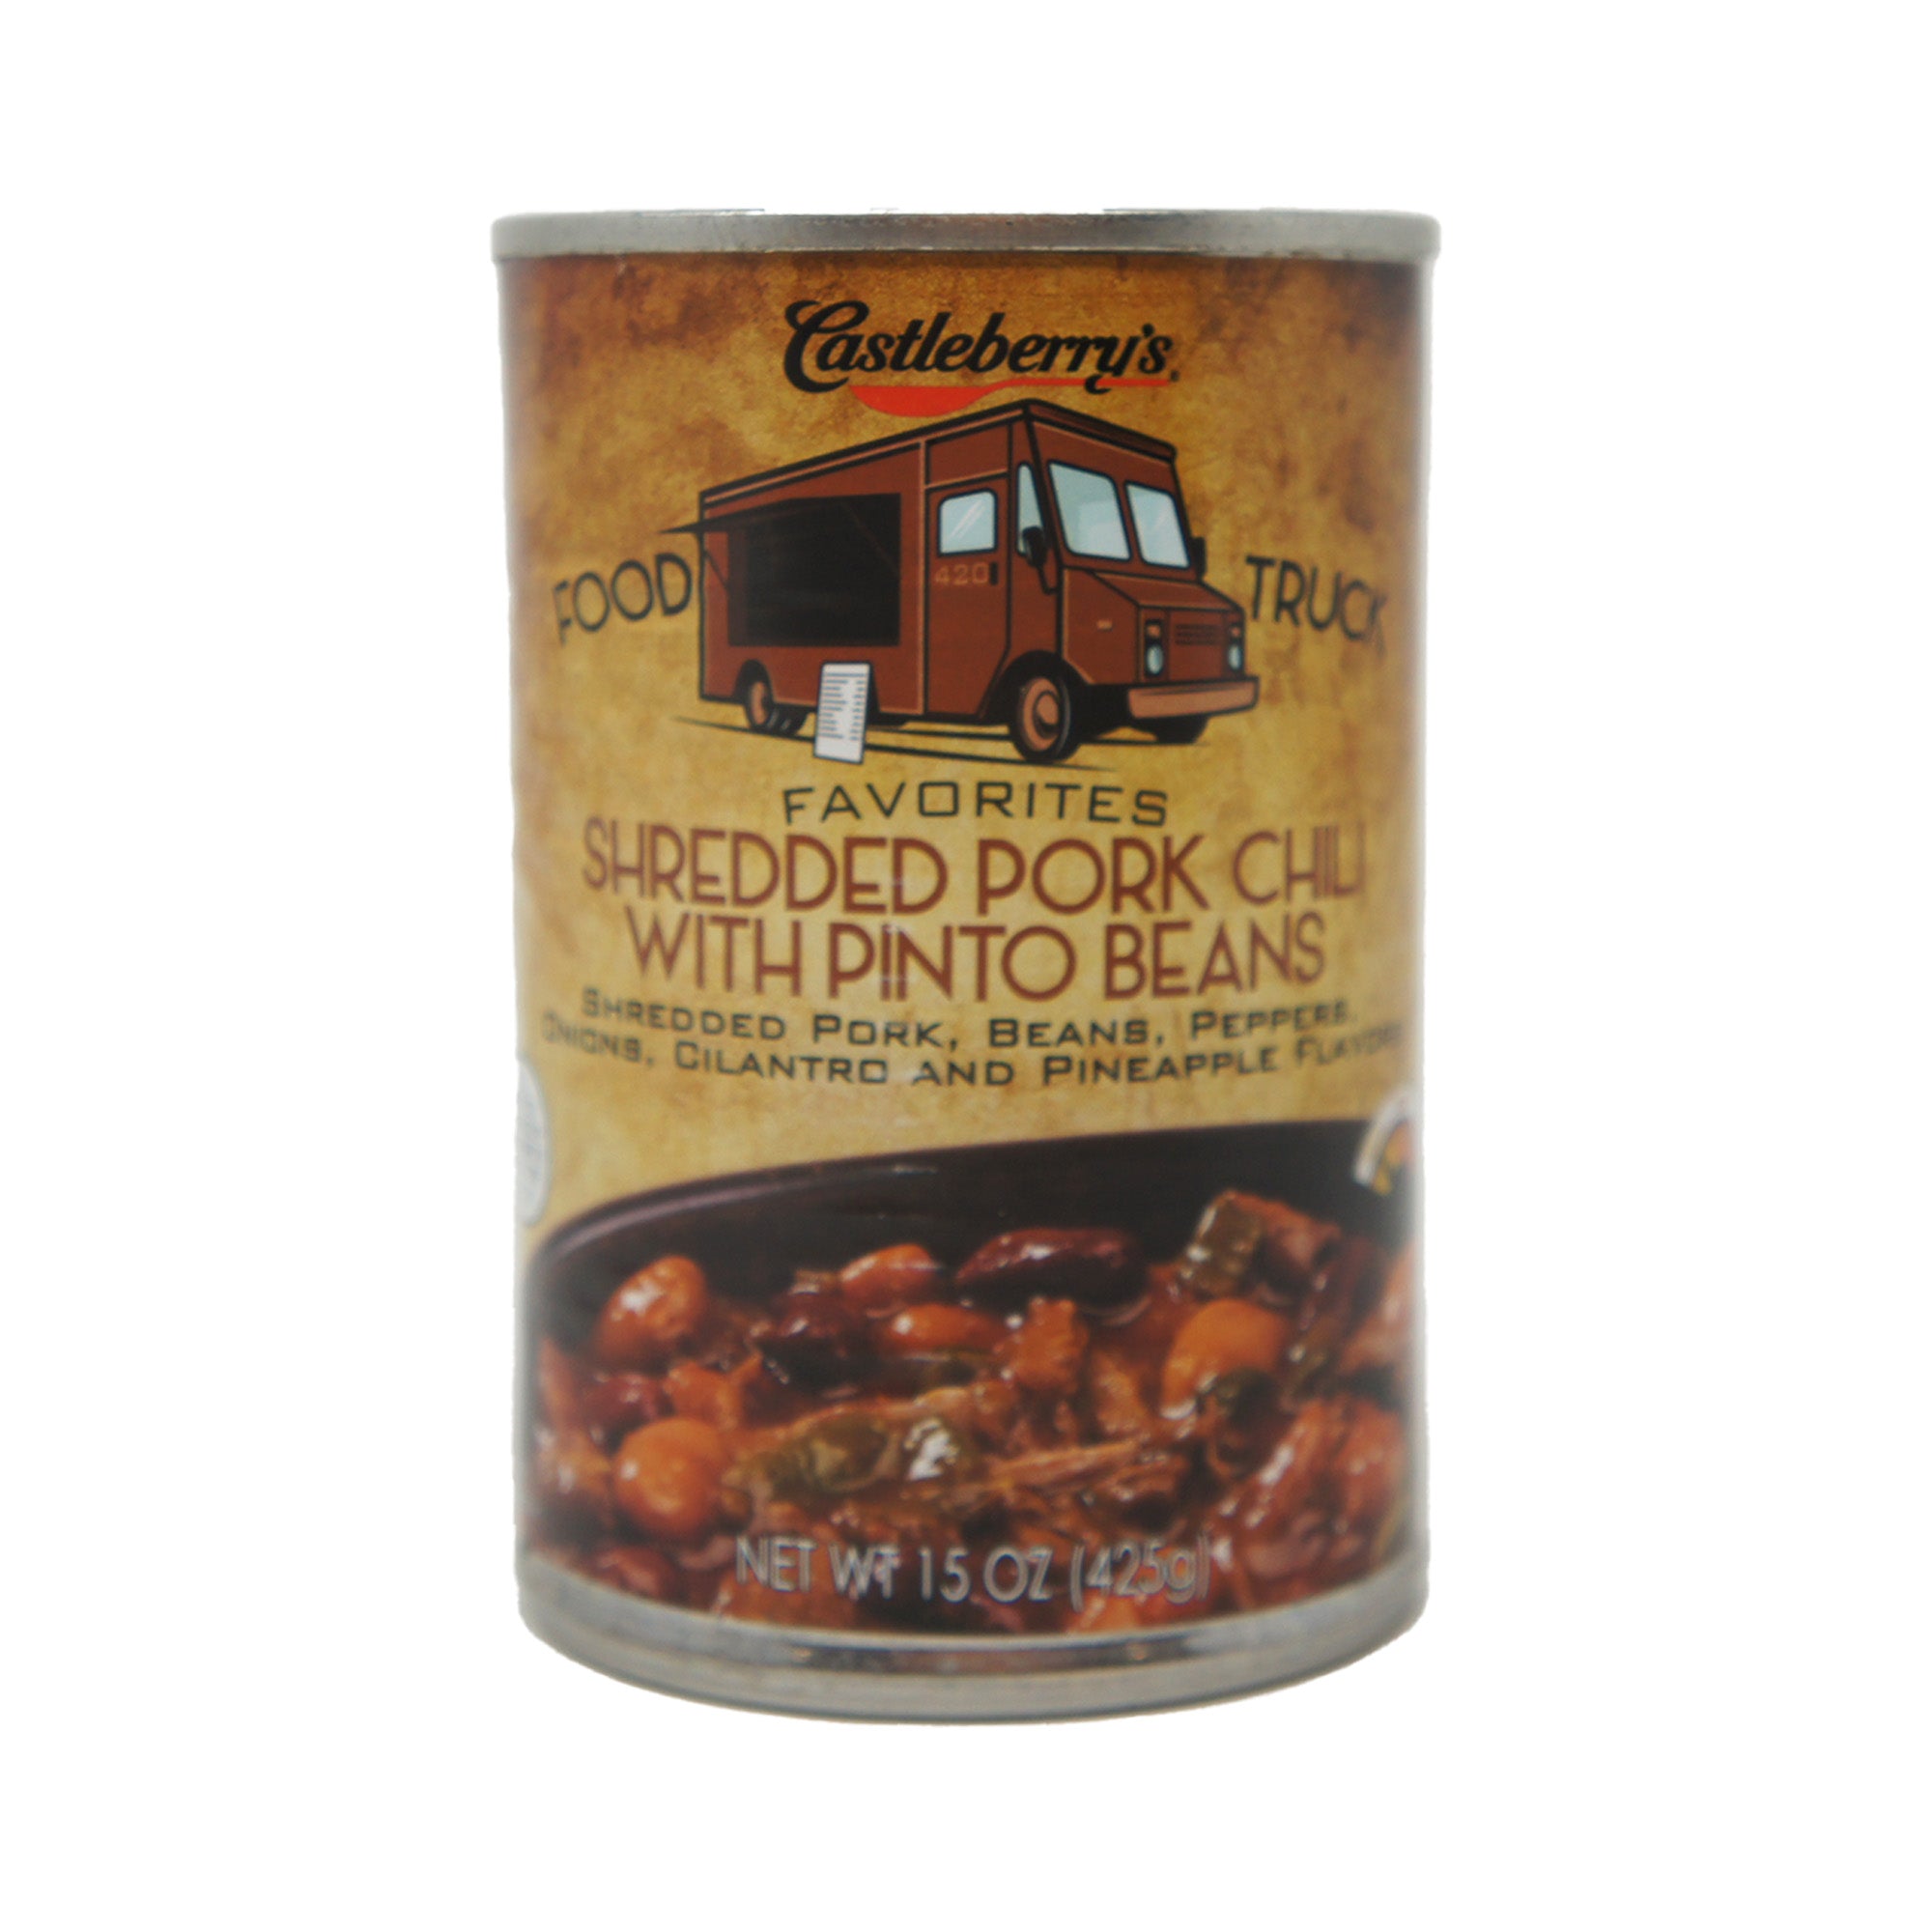 Castleberry's Food Truck Favorites, Shredded Pork Chili with Pinto Beans, 15 oz Cans